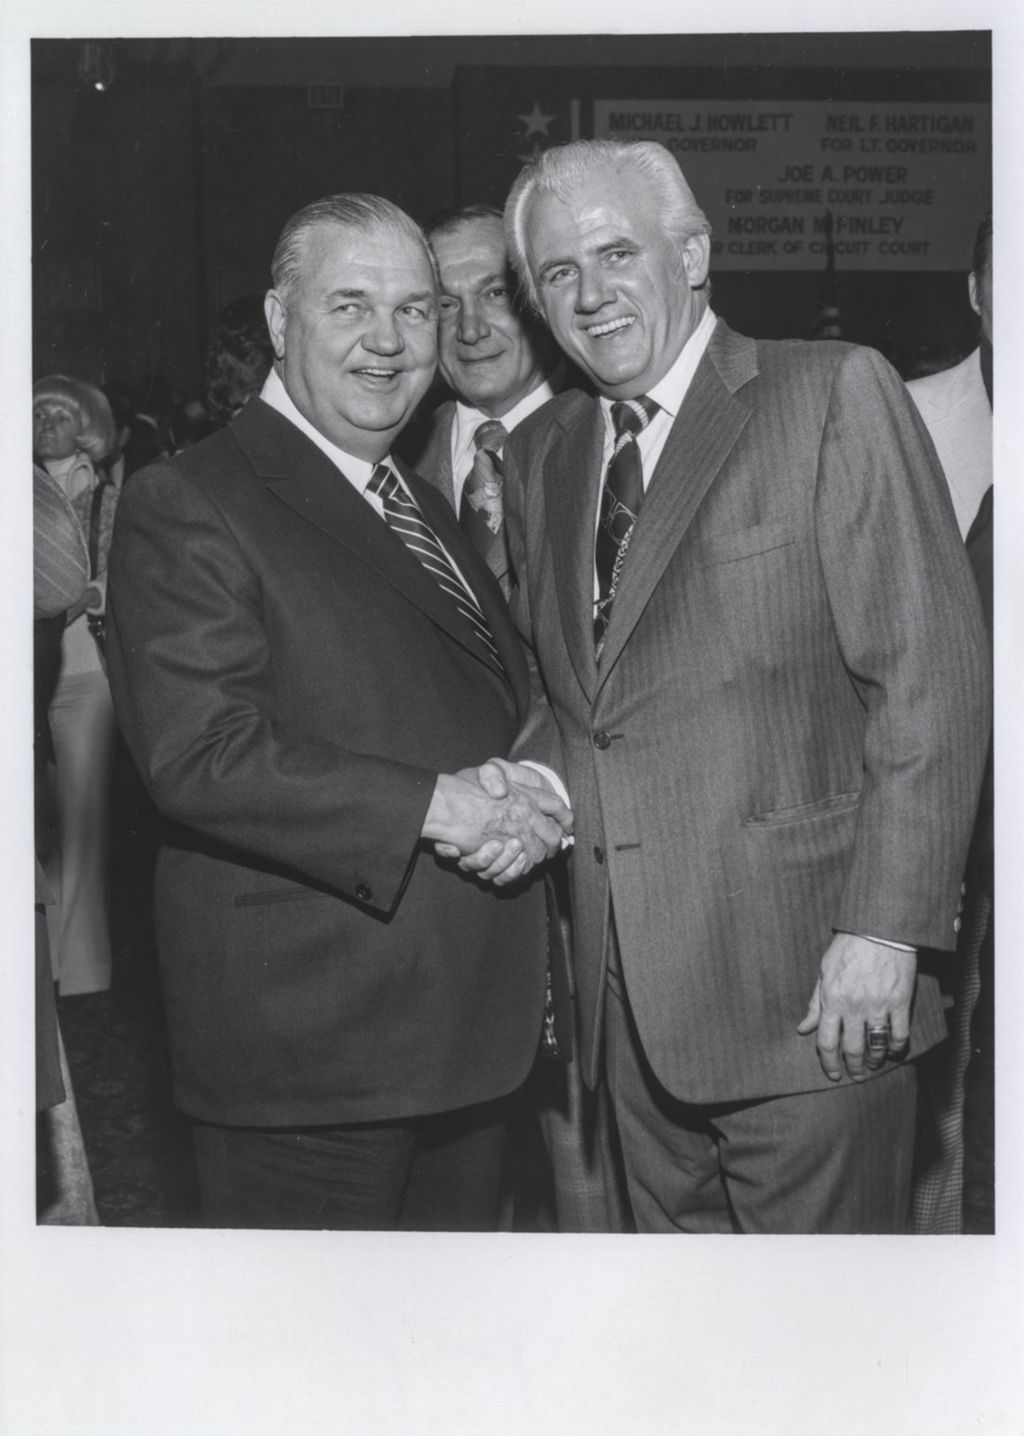 Michael J. Howlett shaking hands with an man at a Democratic Club of Winnetka event